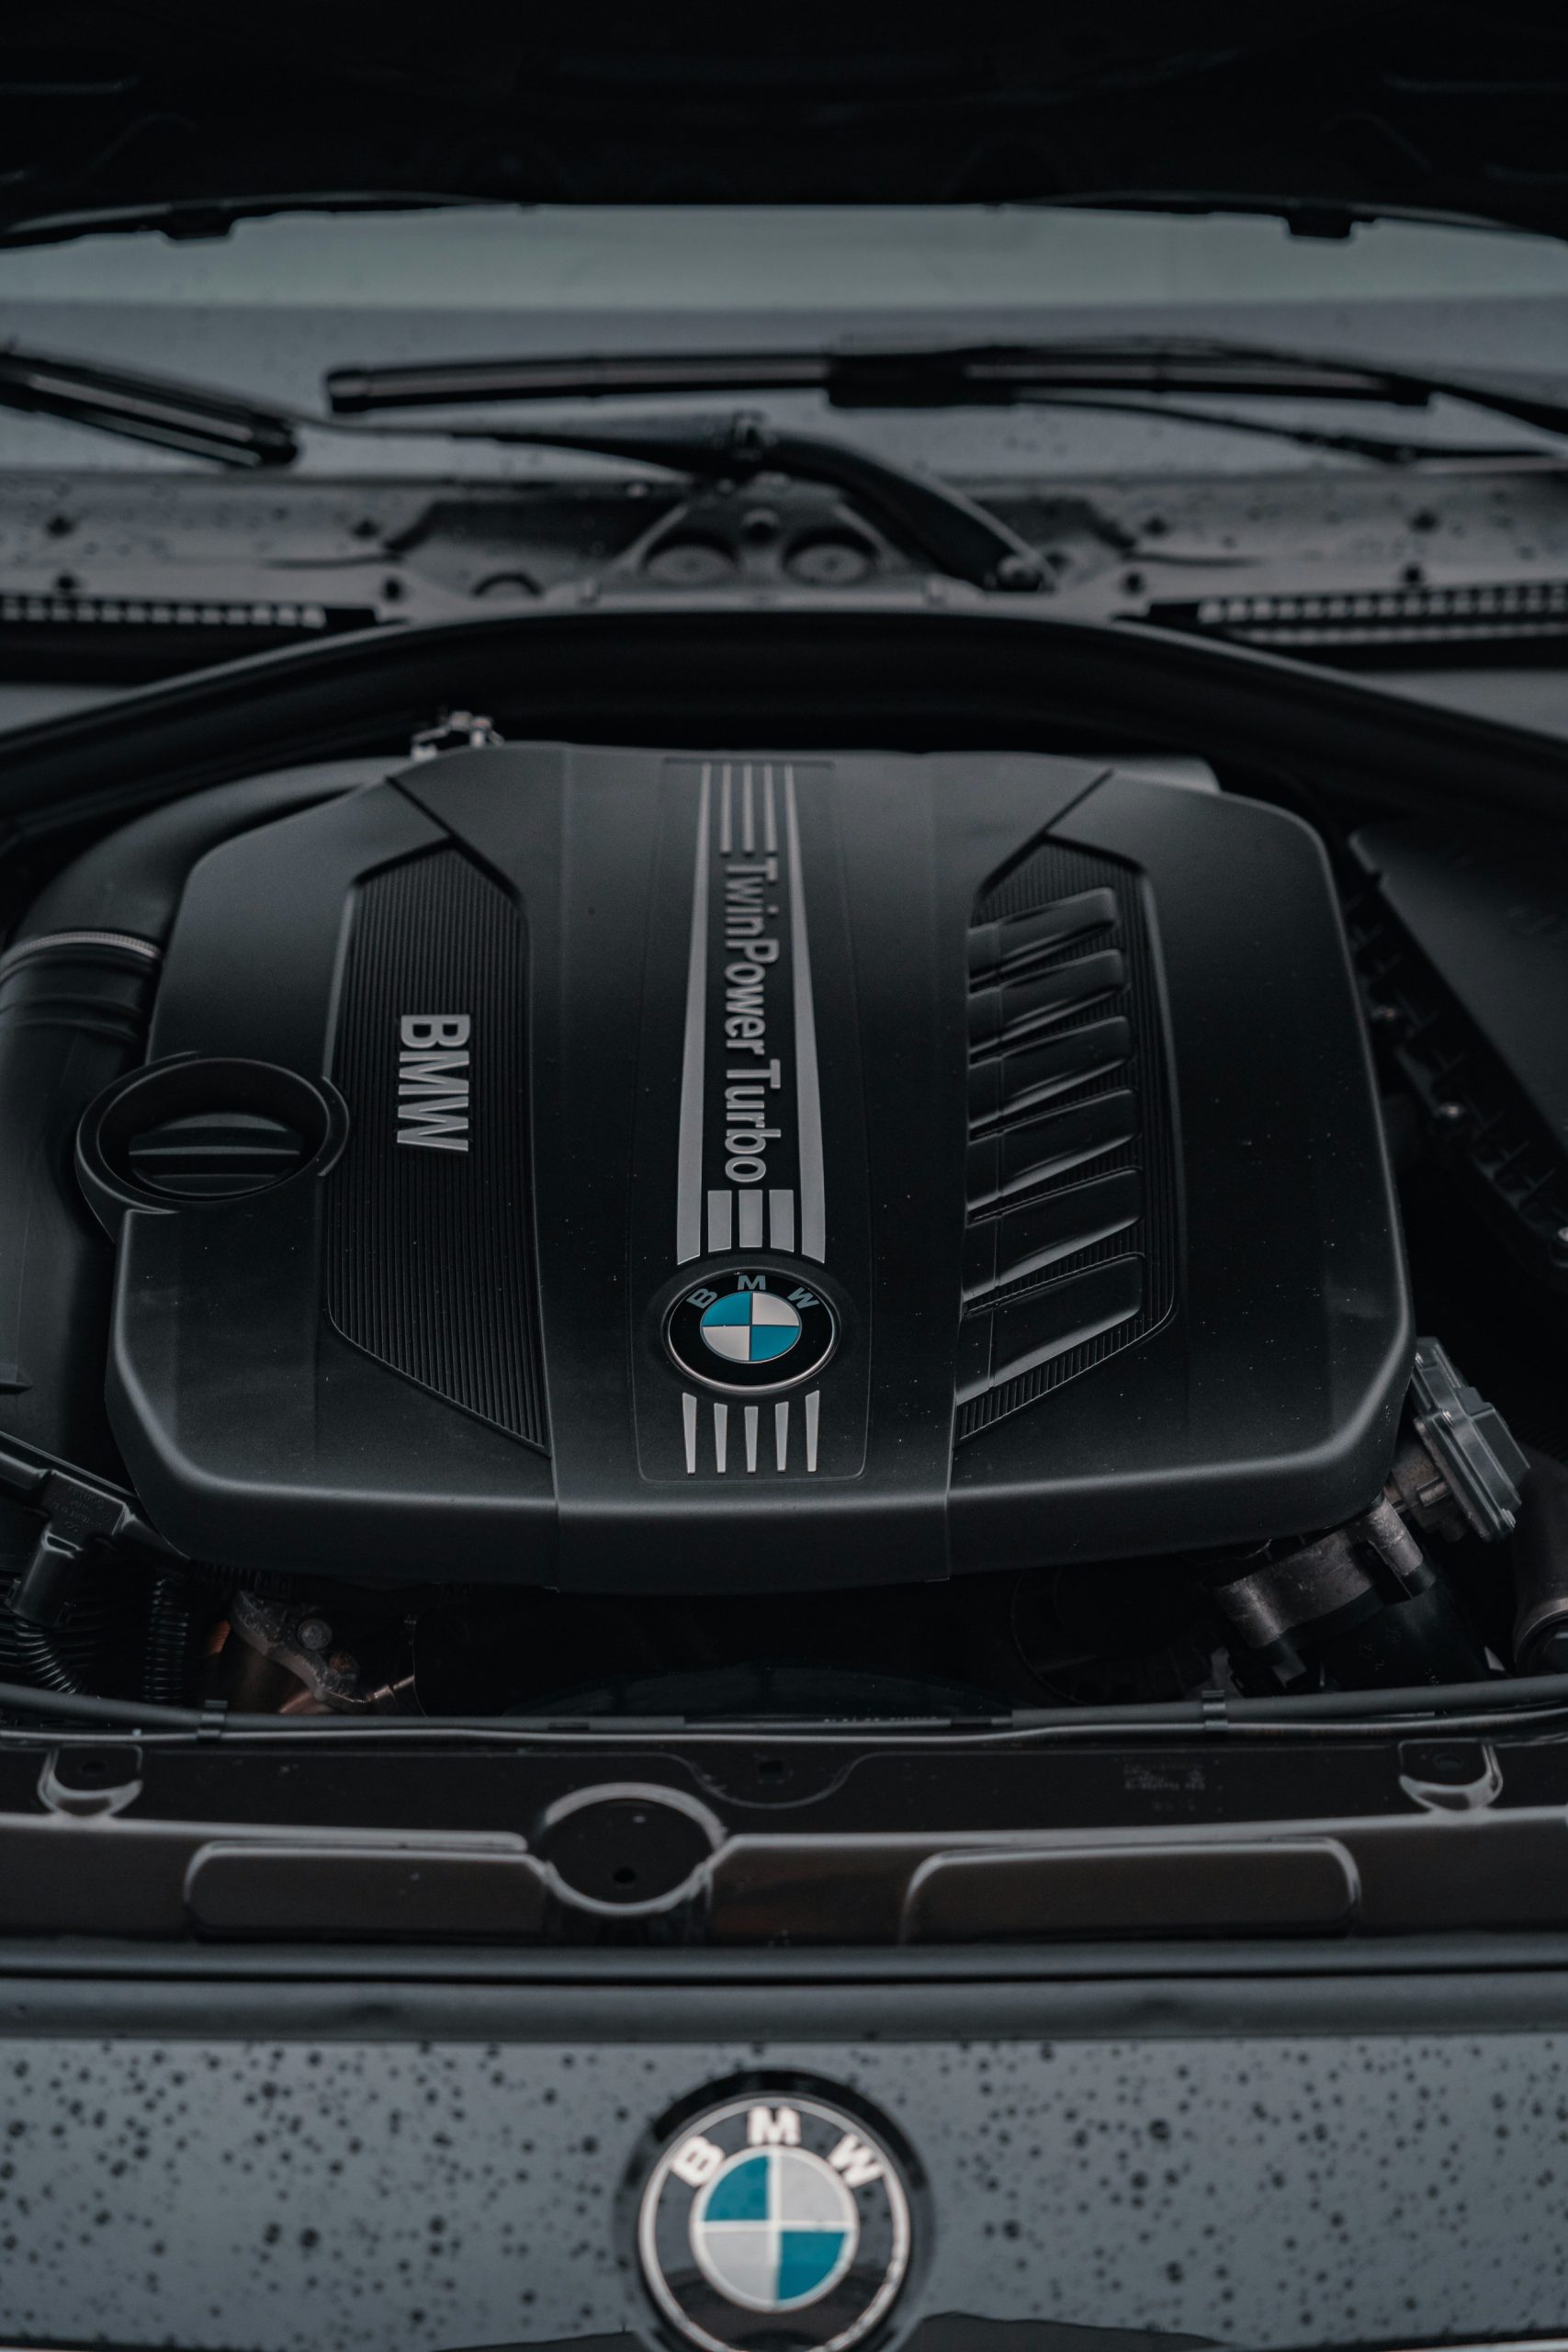 Under the hood of a BMW vehicle, looking at the turbo-twin power engine